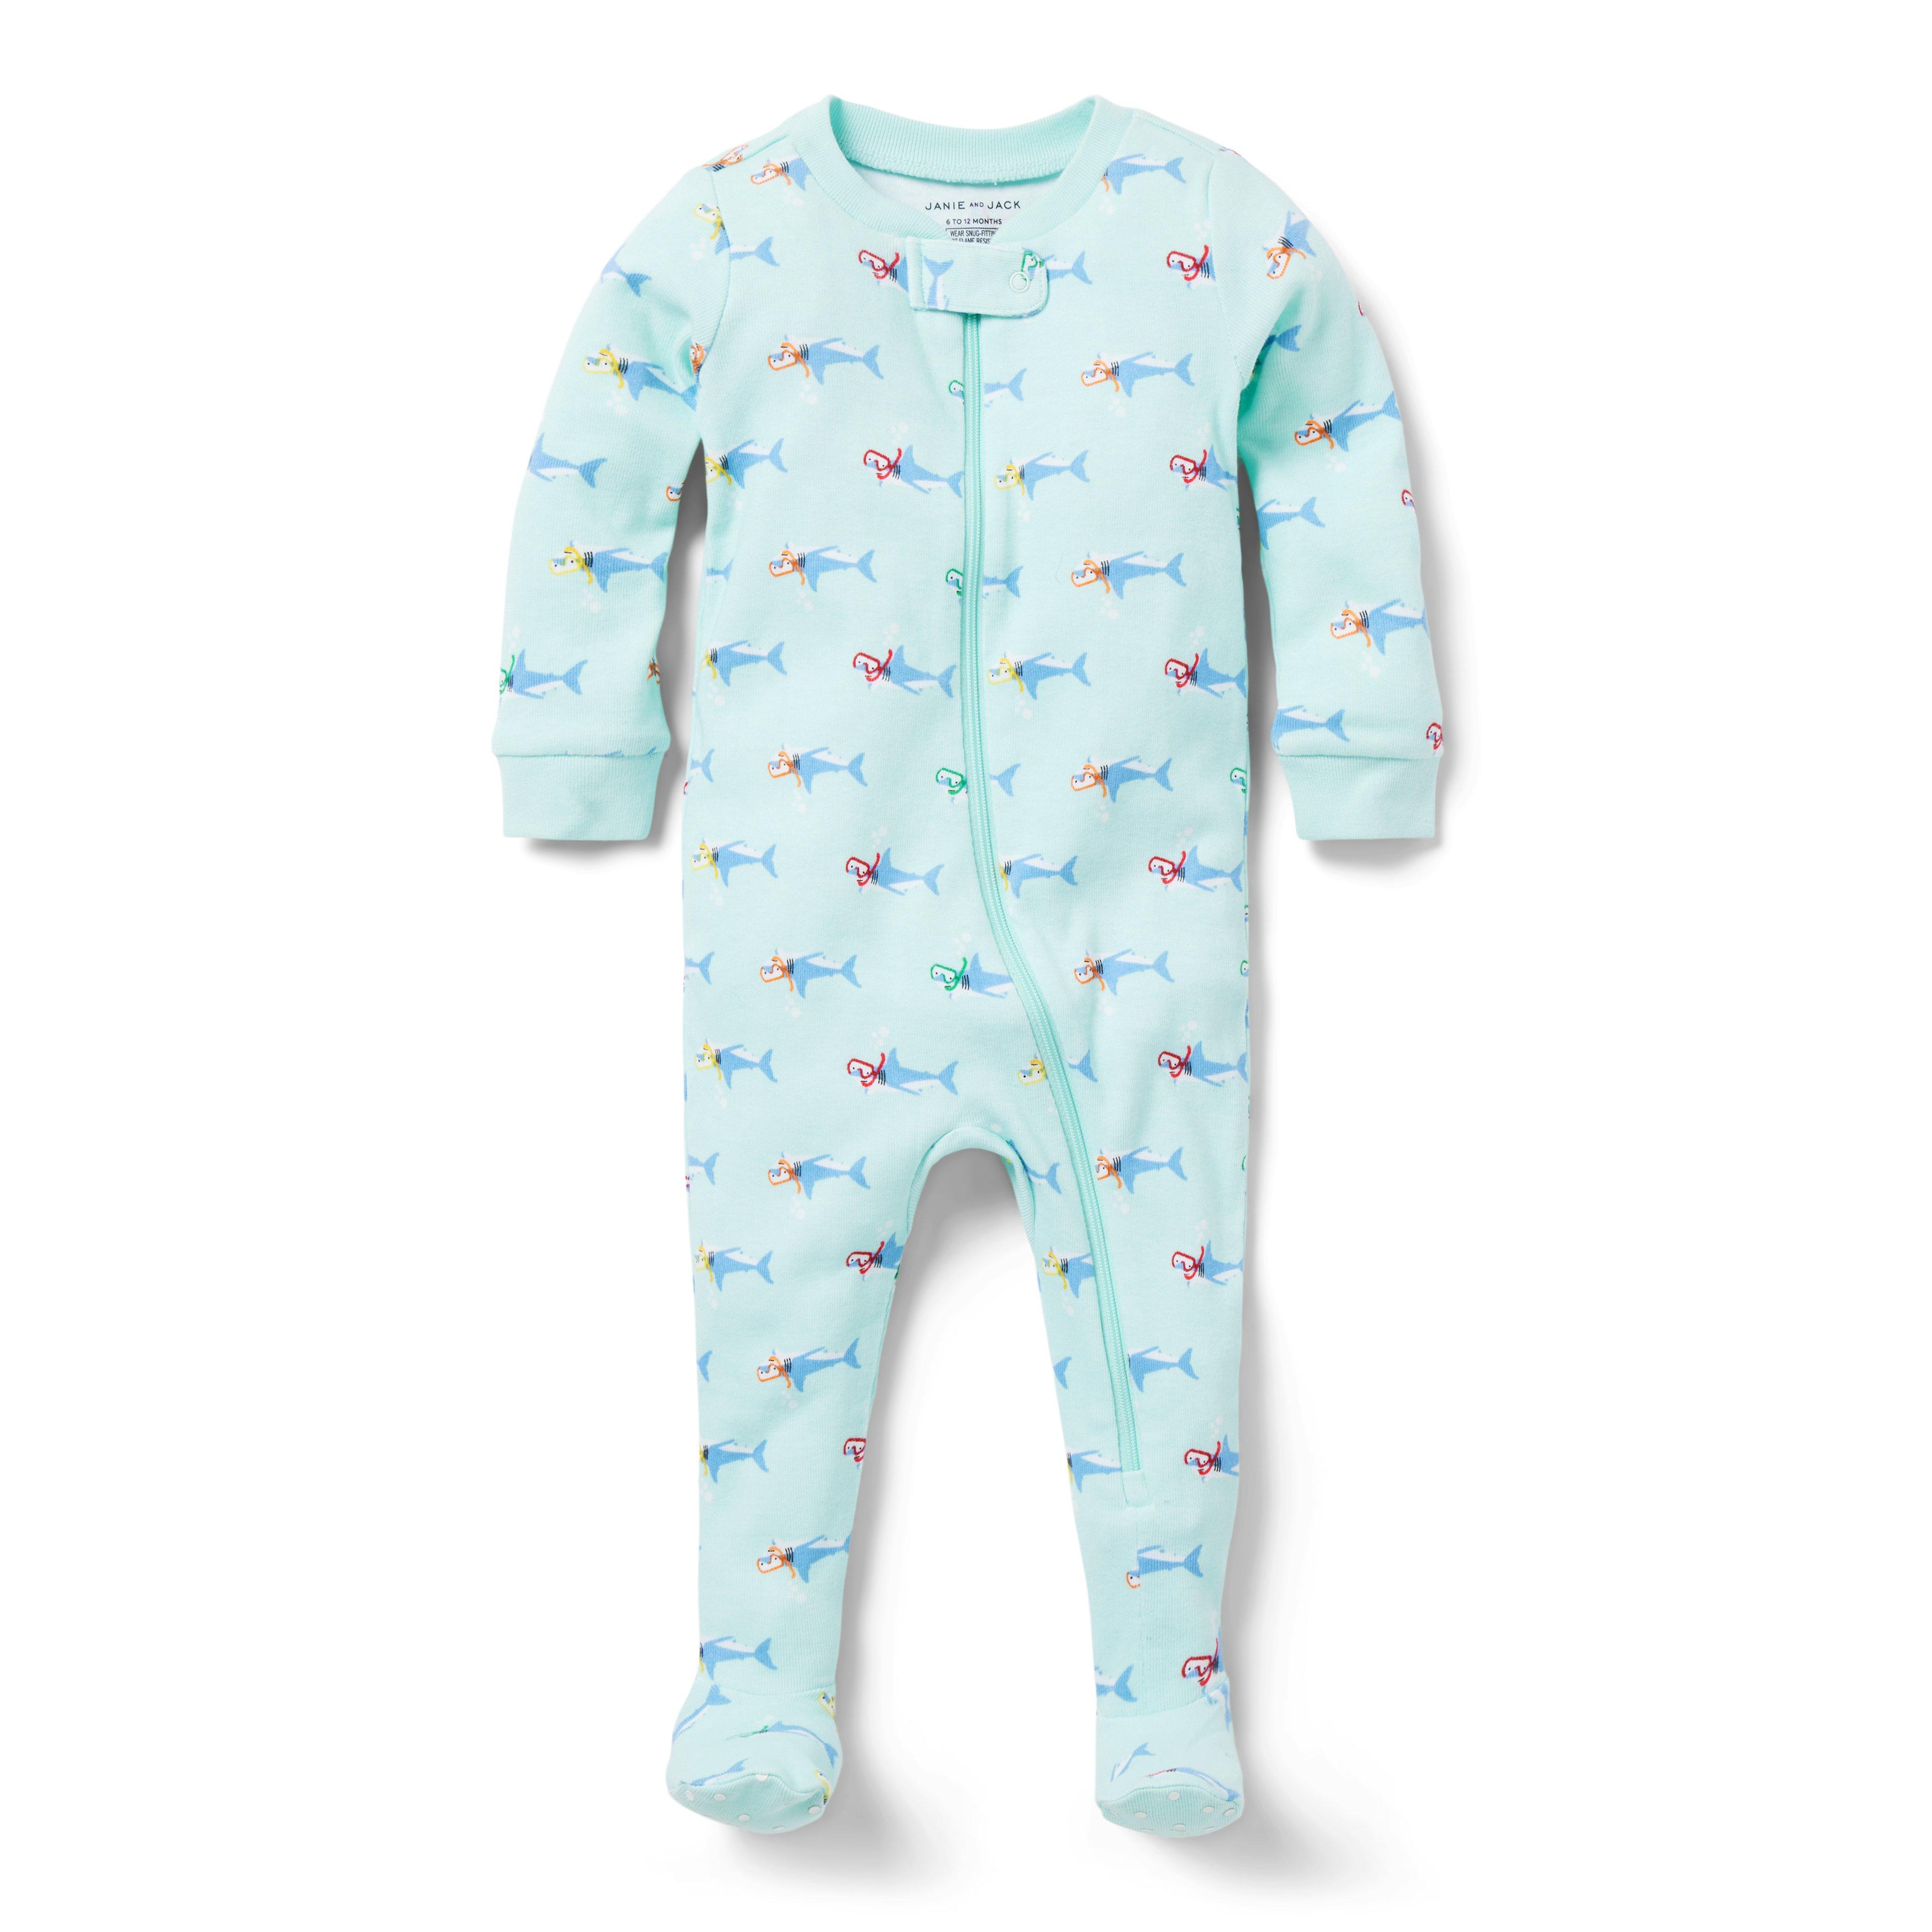 Baby Good Night Footed Pajama in Snorkeling Sharks 